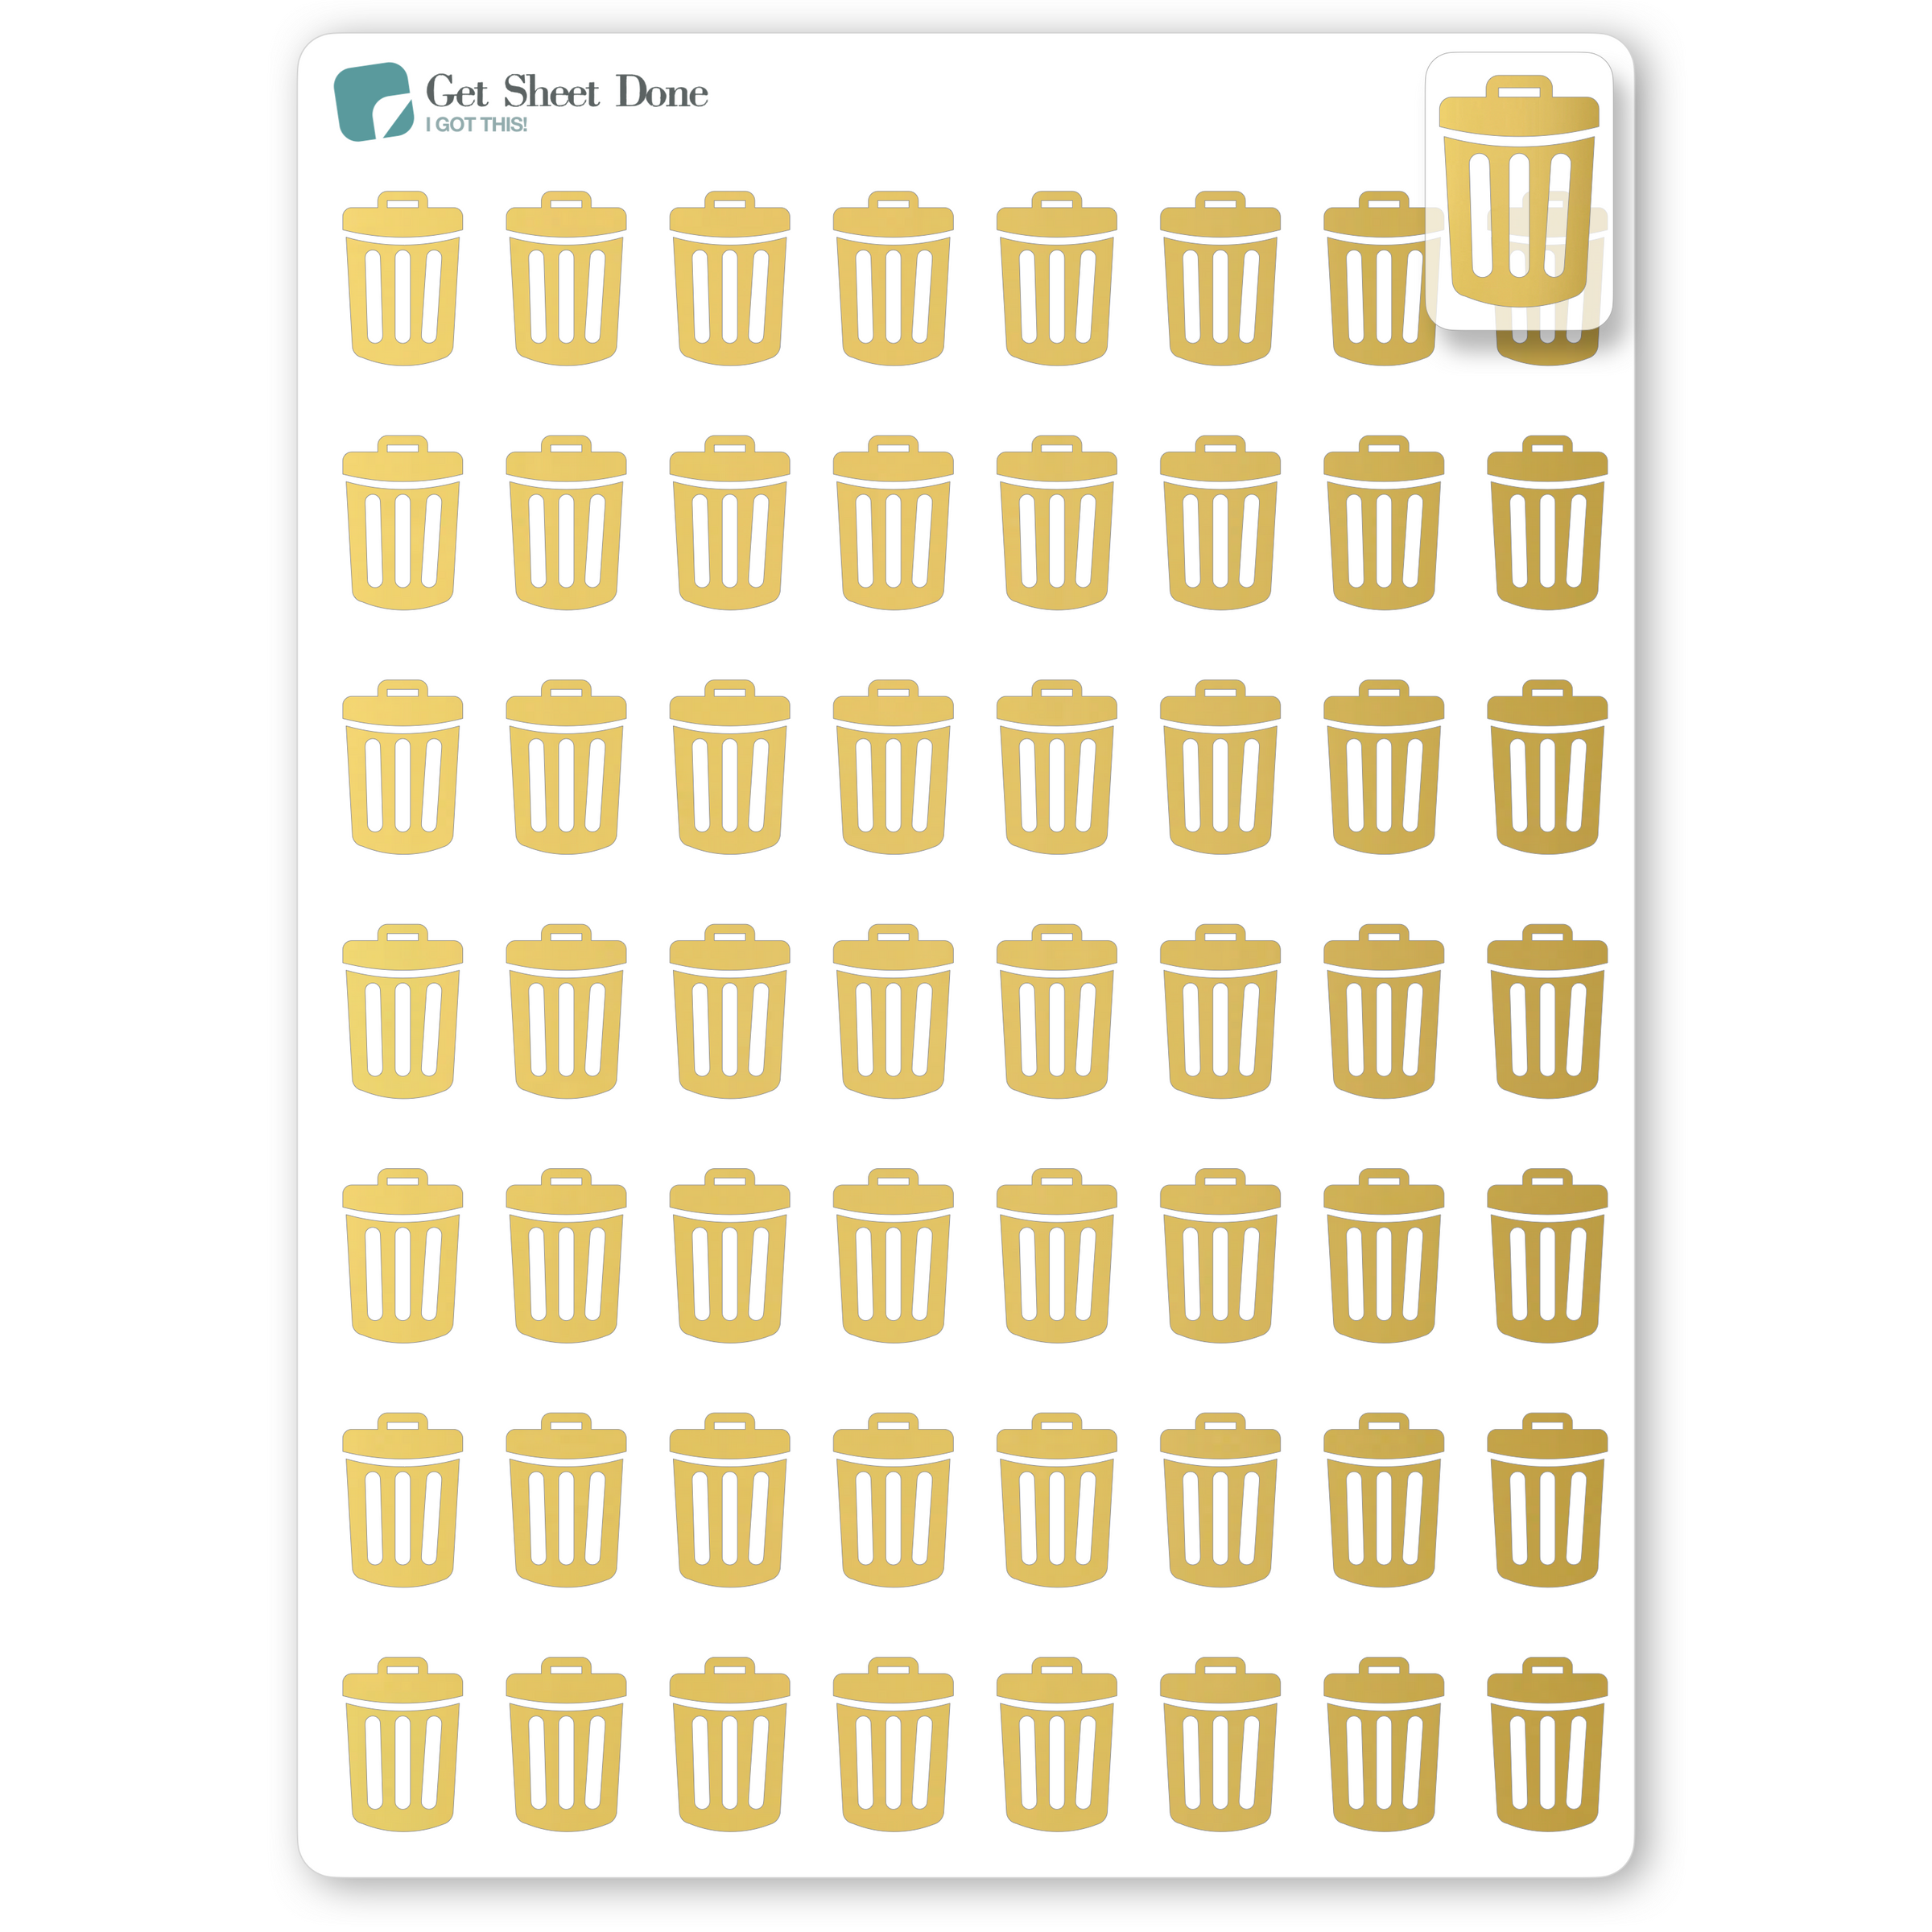 Foiled Trash Day Planner Stickers.